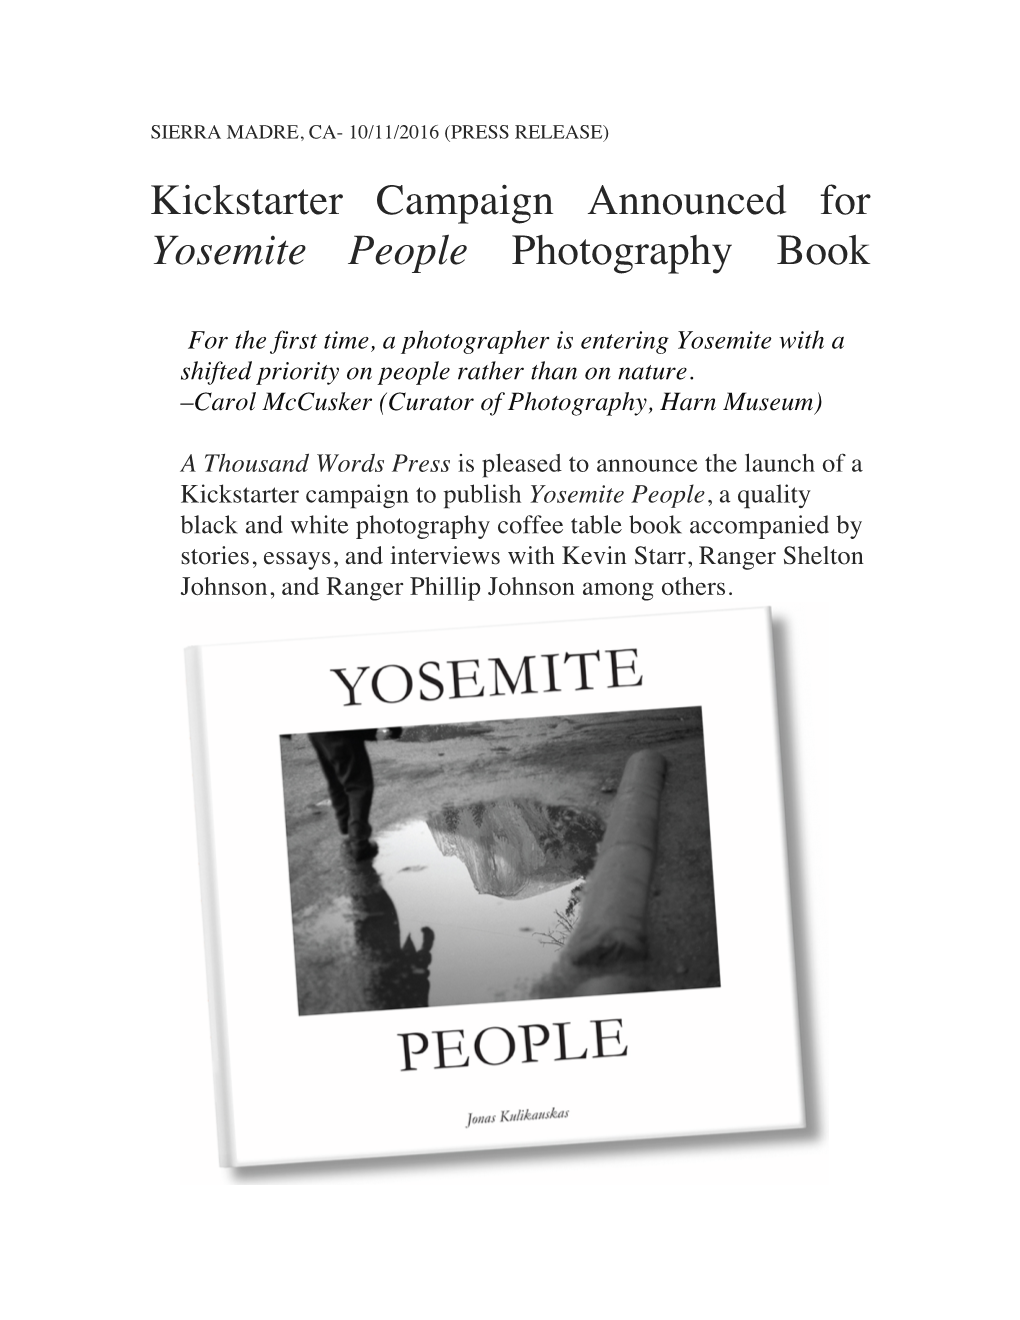 Kickstarter Campaign Announced for Yosemite People Photography Book